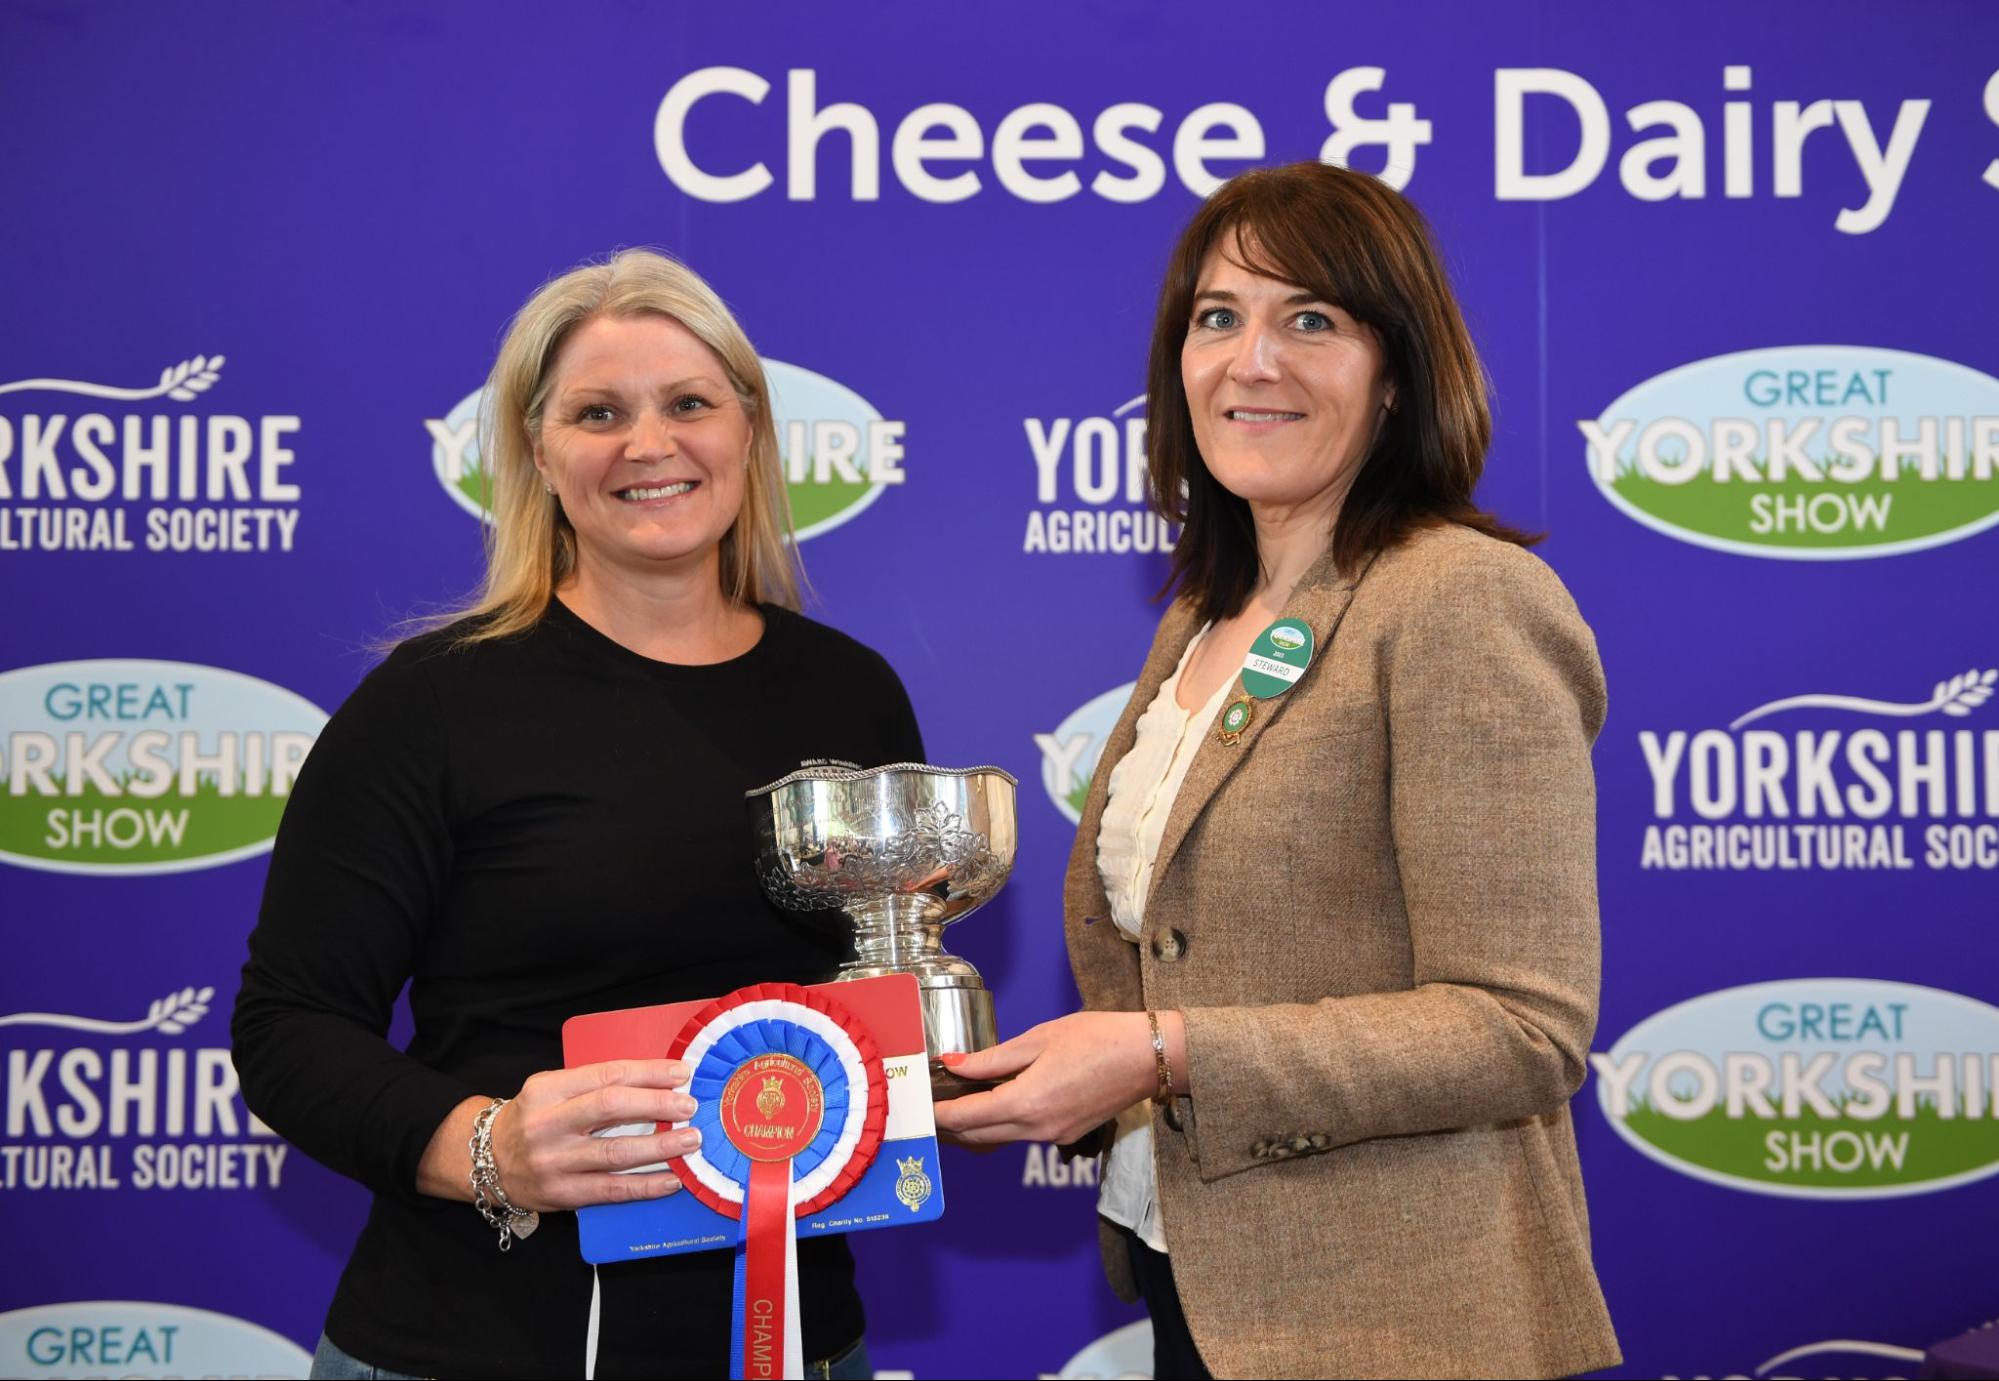 Katie picking up the award for ‘Best Yorkshire Product’